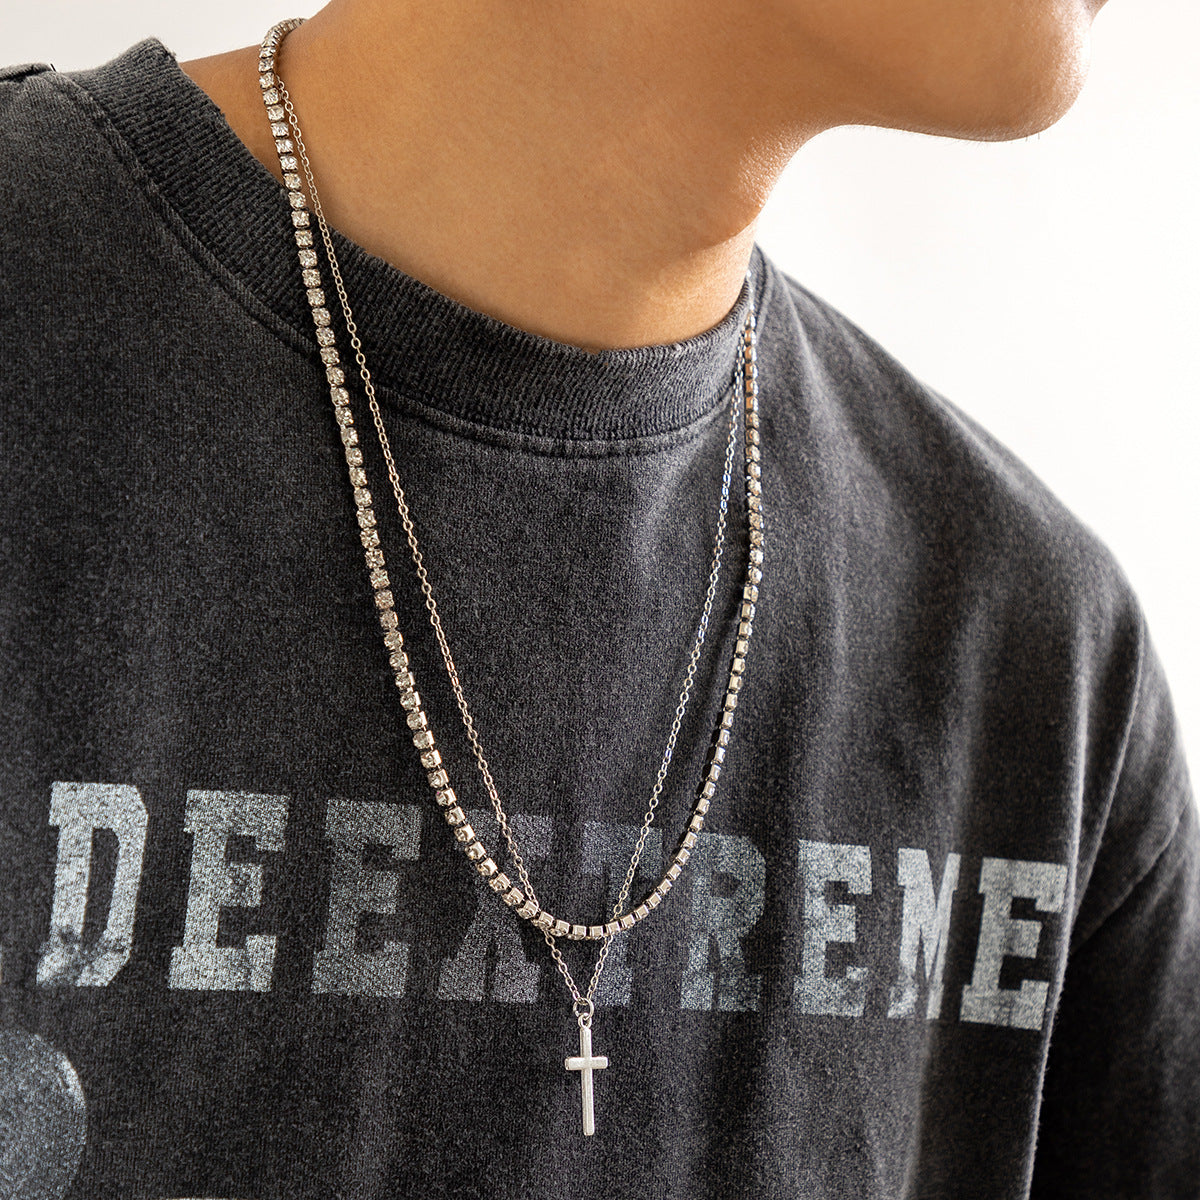 Men Retro Simple Cross Double Layered Claw Chain Design Hip Hop Necklace